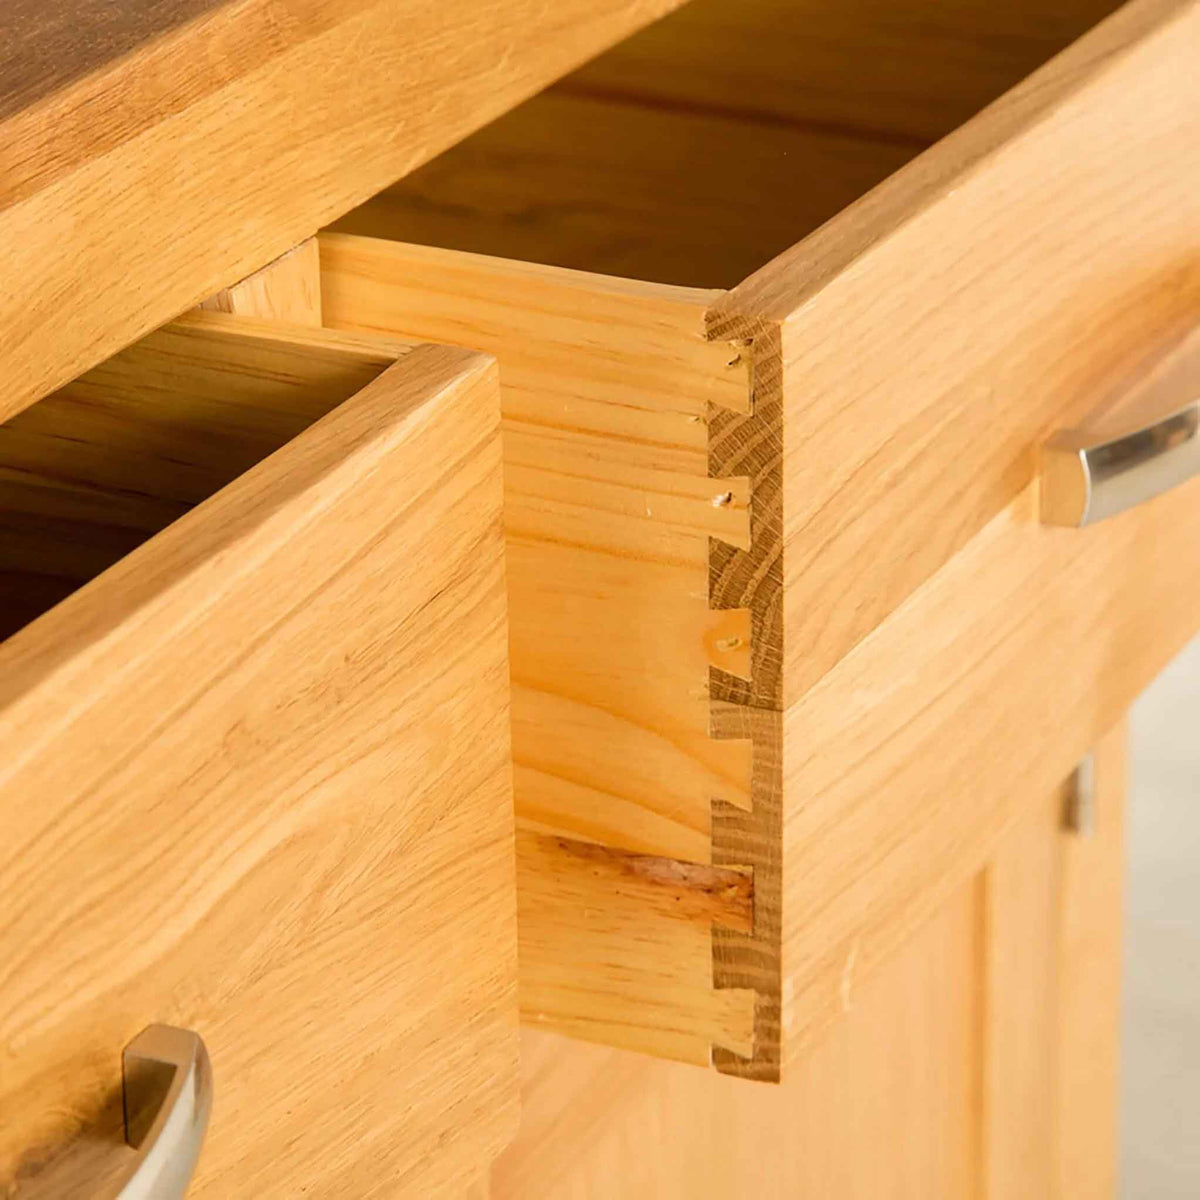 Abbey Light Oak Large Sideboard - Close up of dovetail joints on drawer